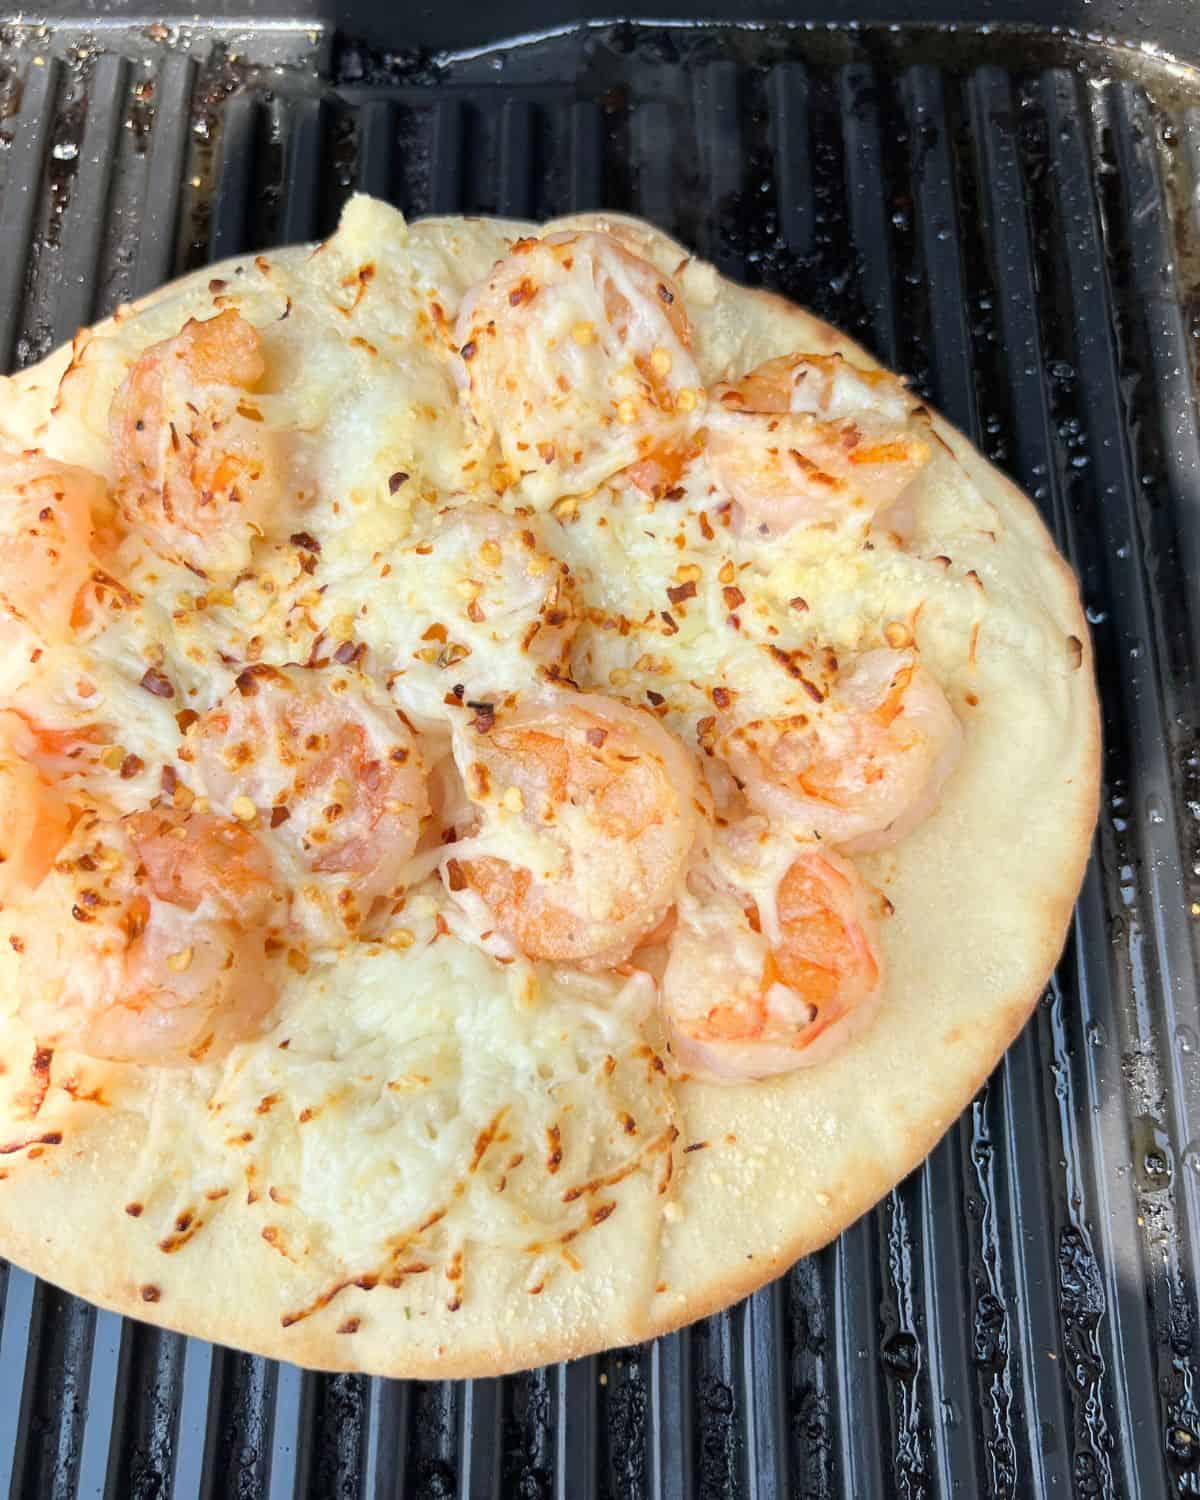 Shrimp scampi pizza on a grill set to high heat. 